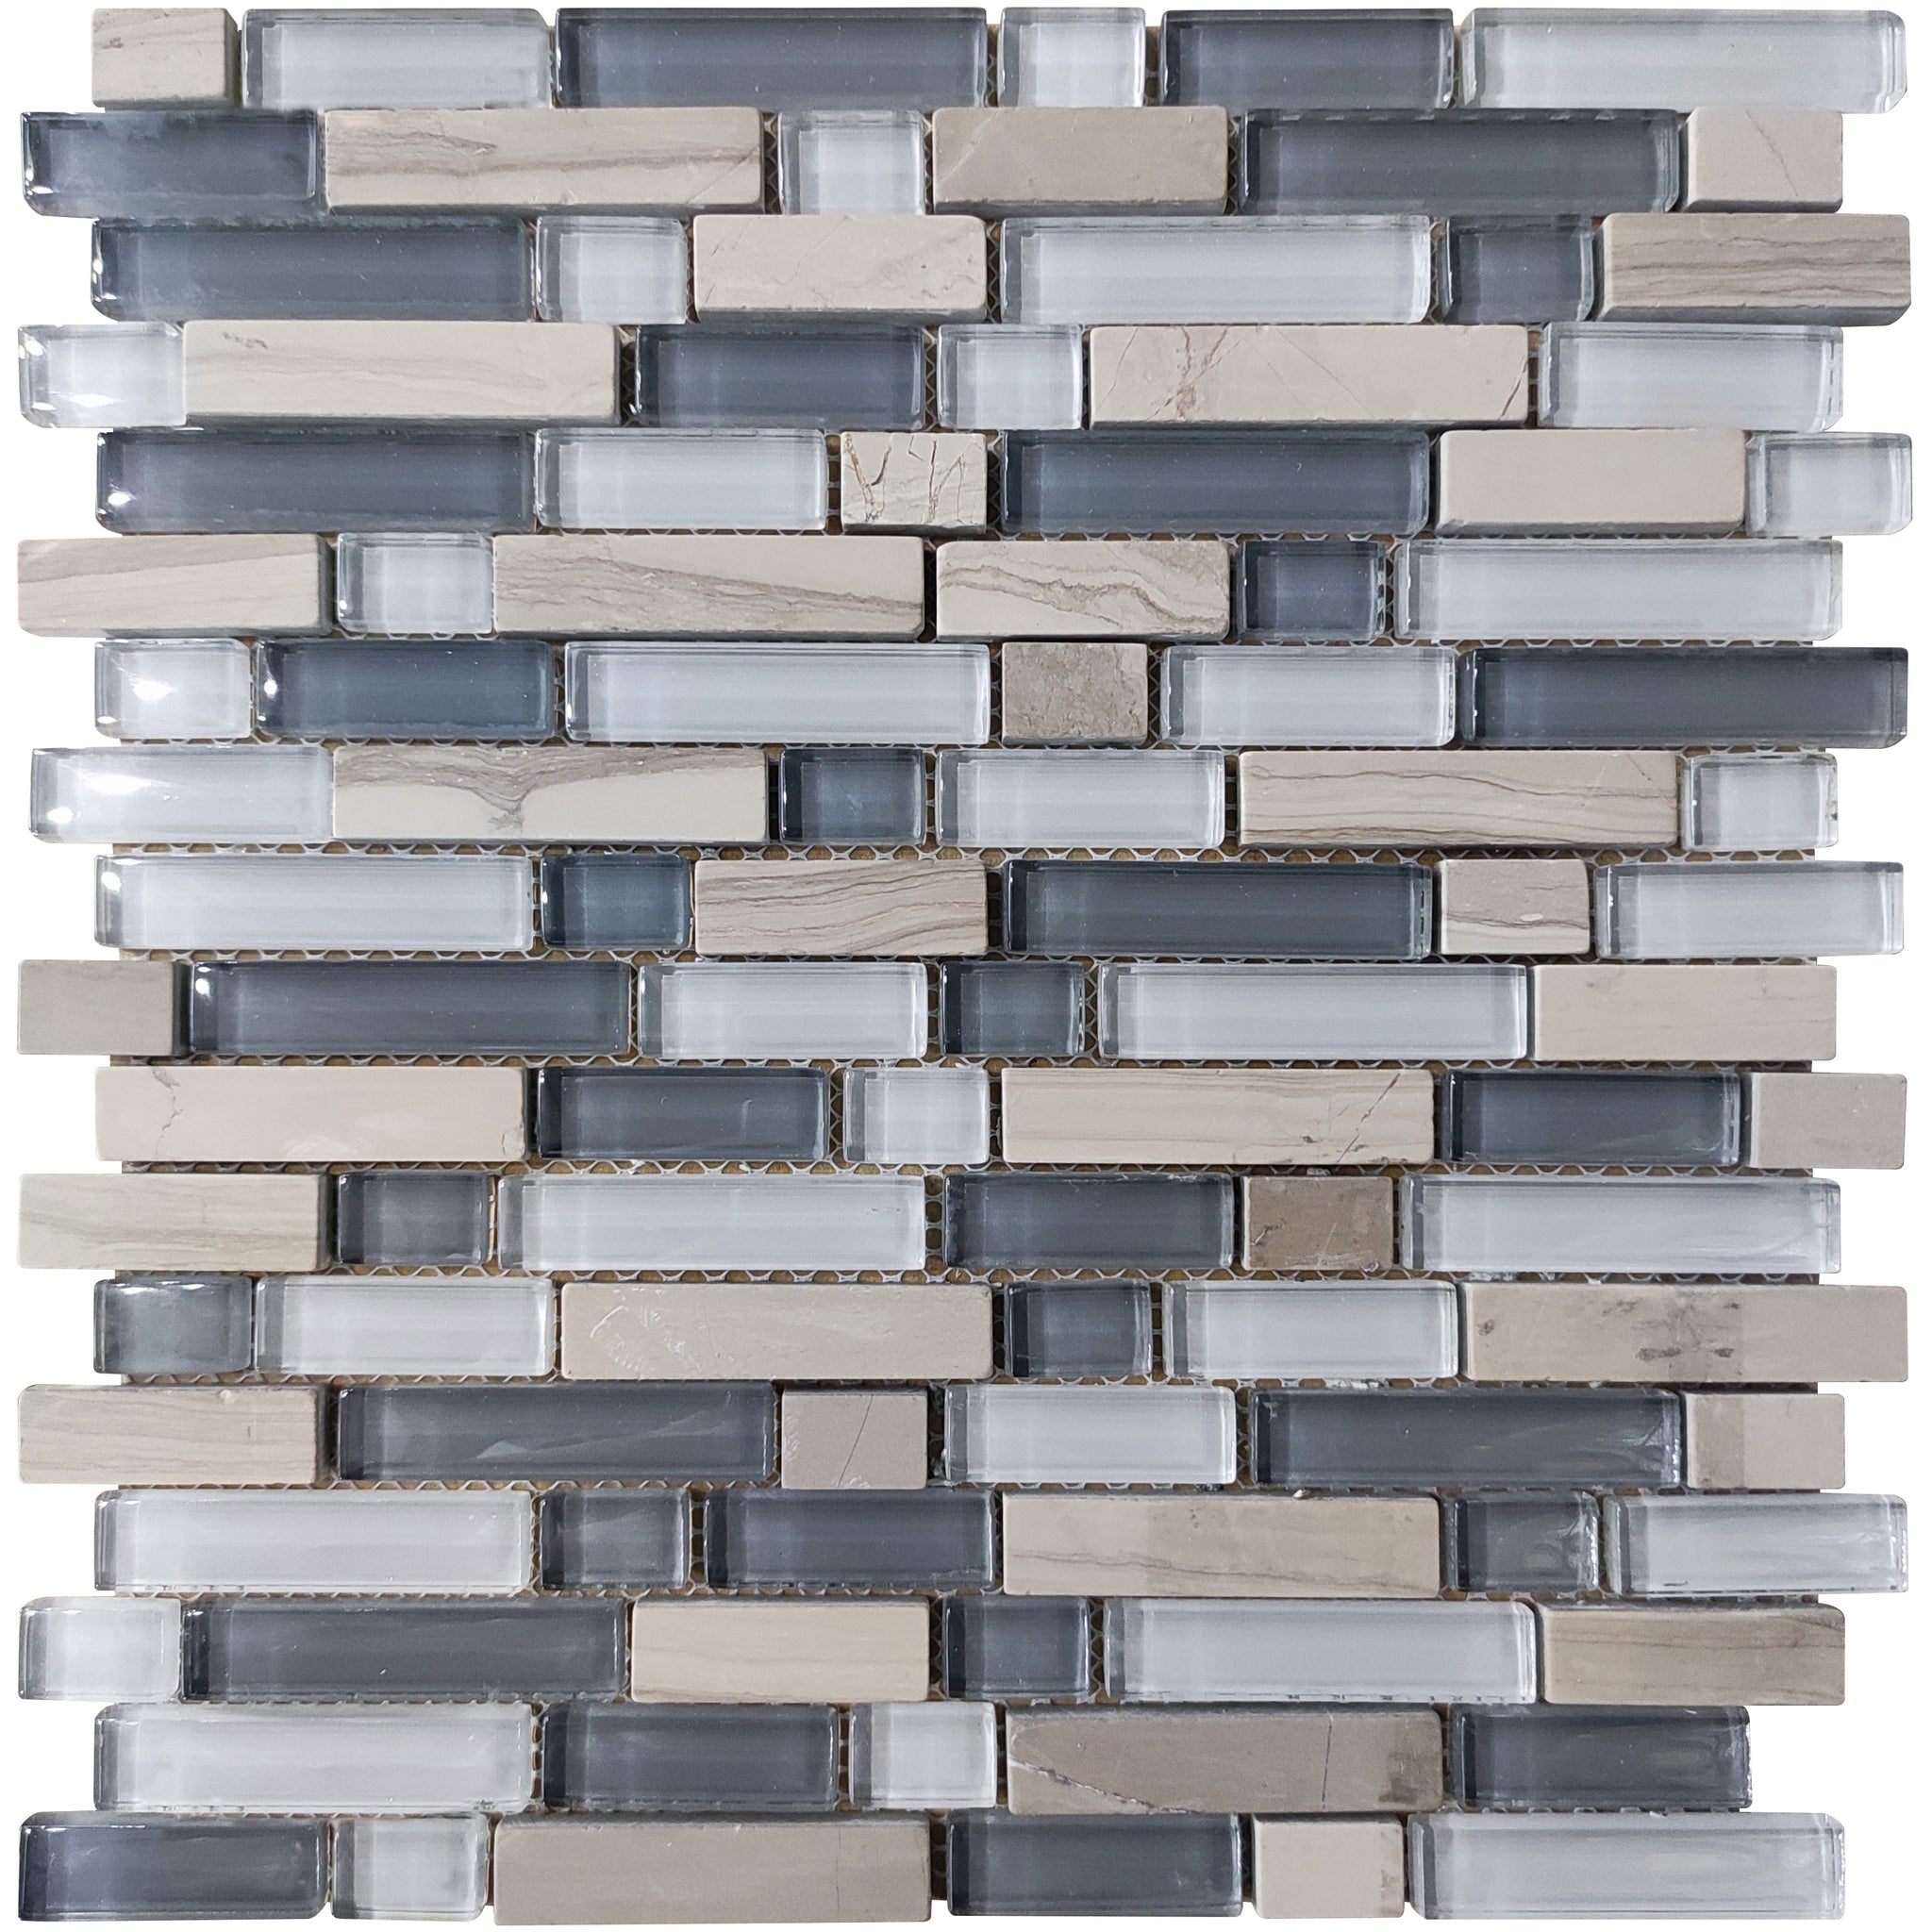 12 x 12 in Mosaic Tile with Grey Color and Glossy Finish